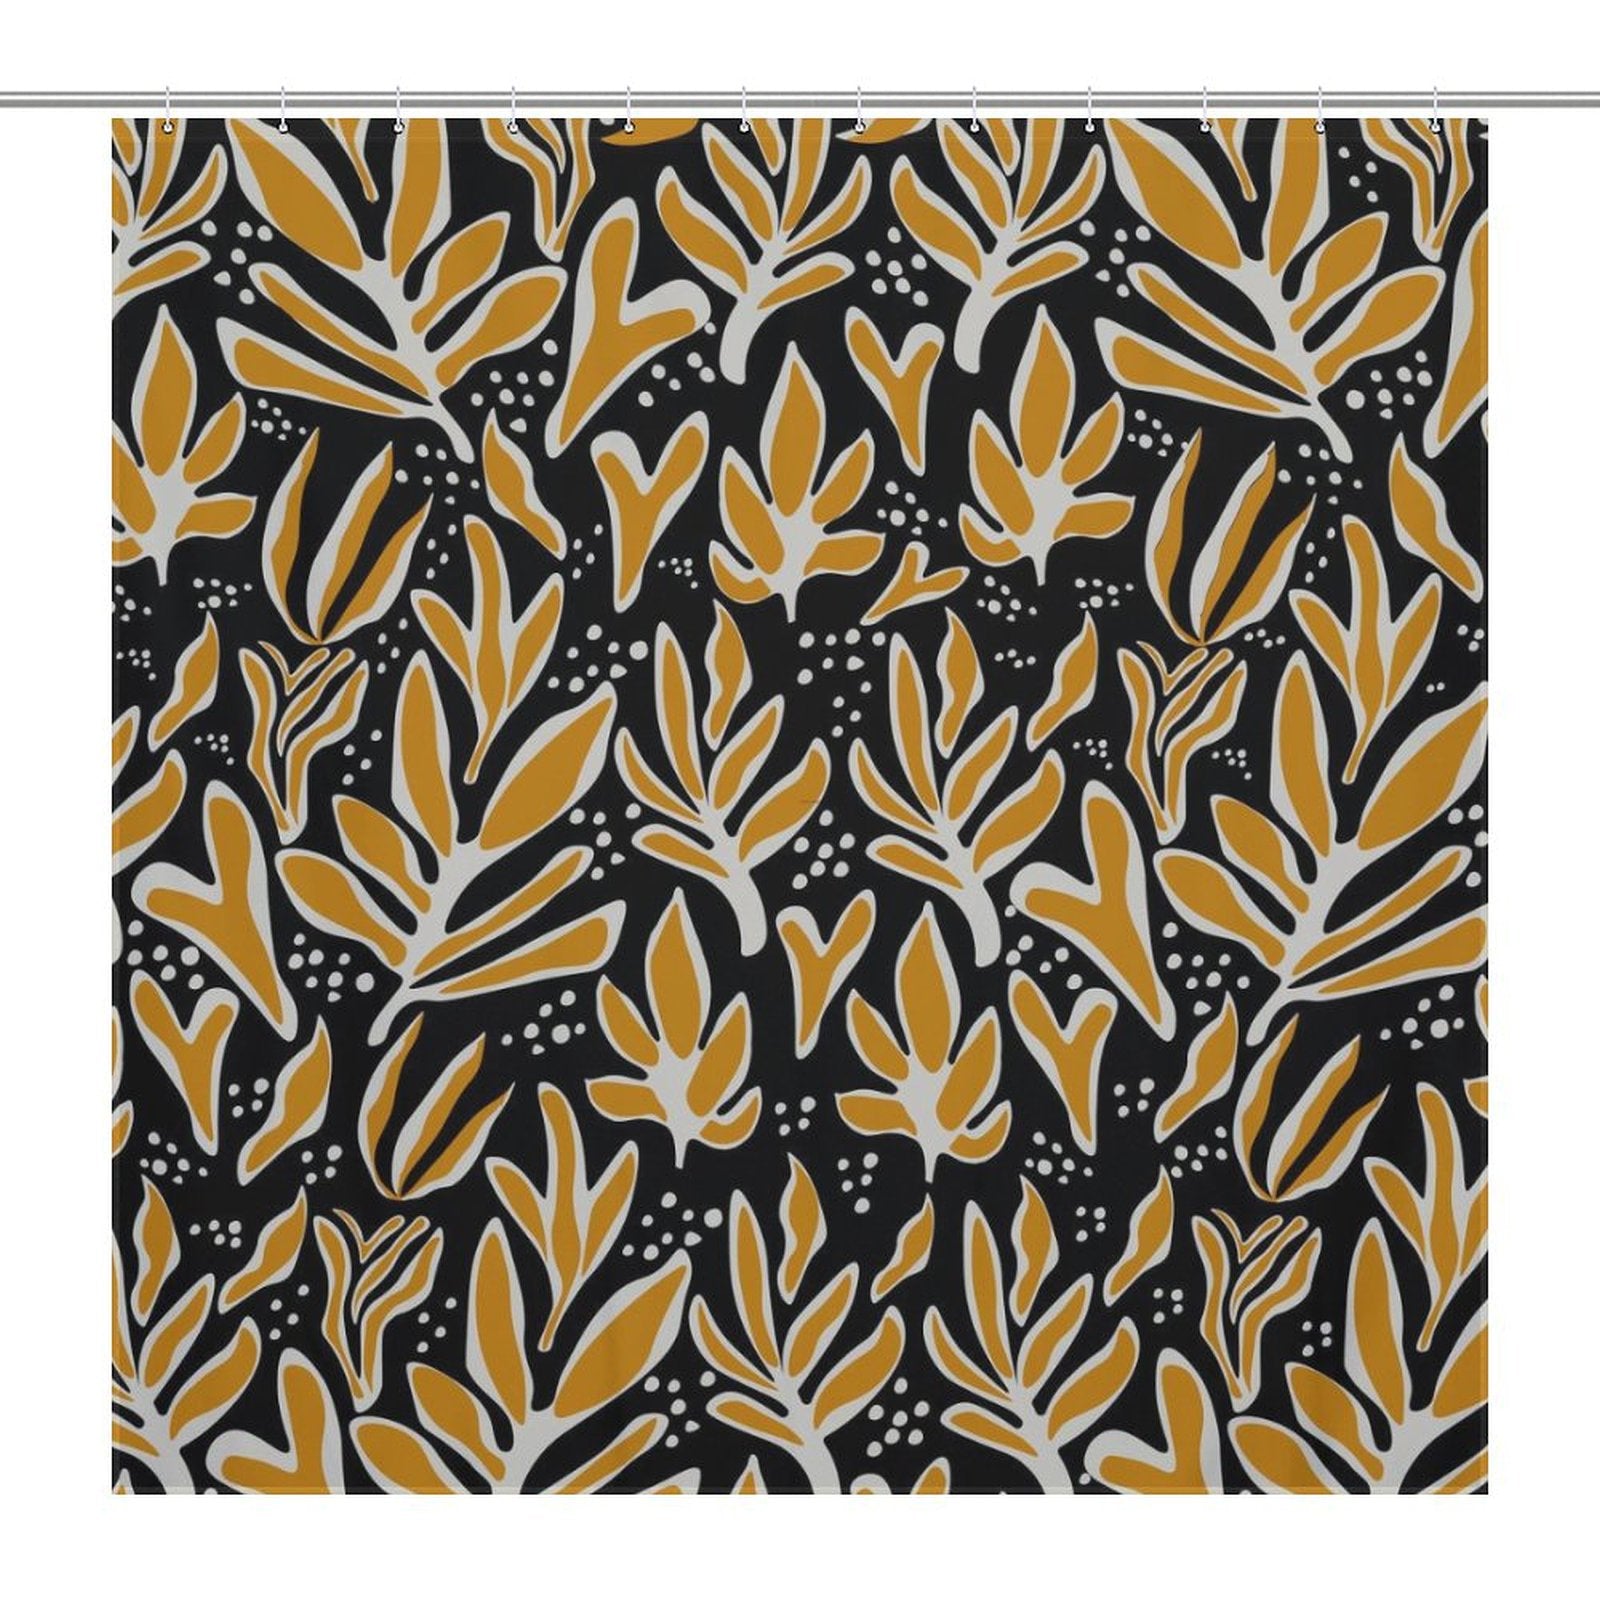 A **Cotton Cat** shower curtain with a dark background featuring an abstract botanical pattern in yellow and white, reminiscent of Mid Century Leaf design.